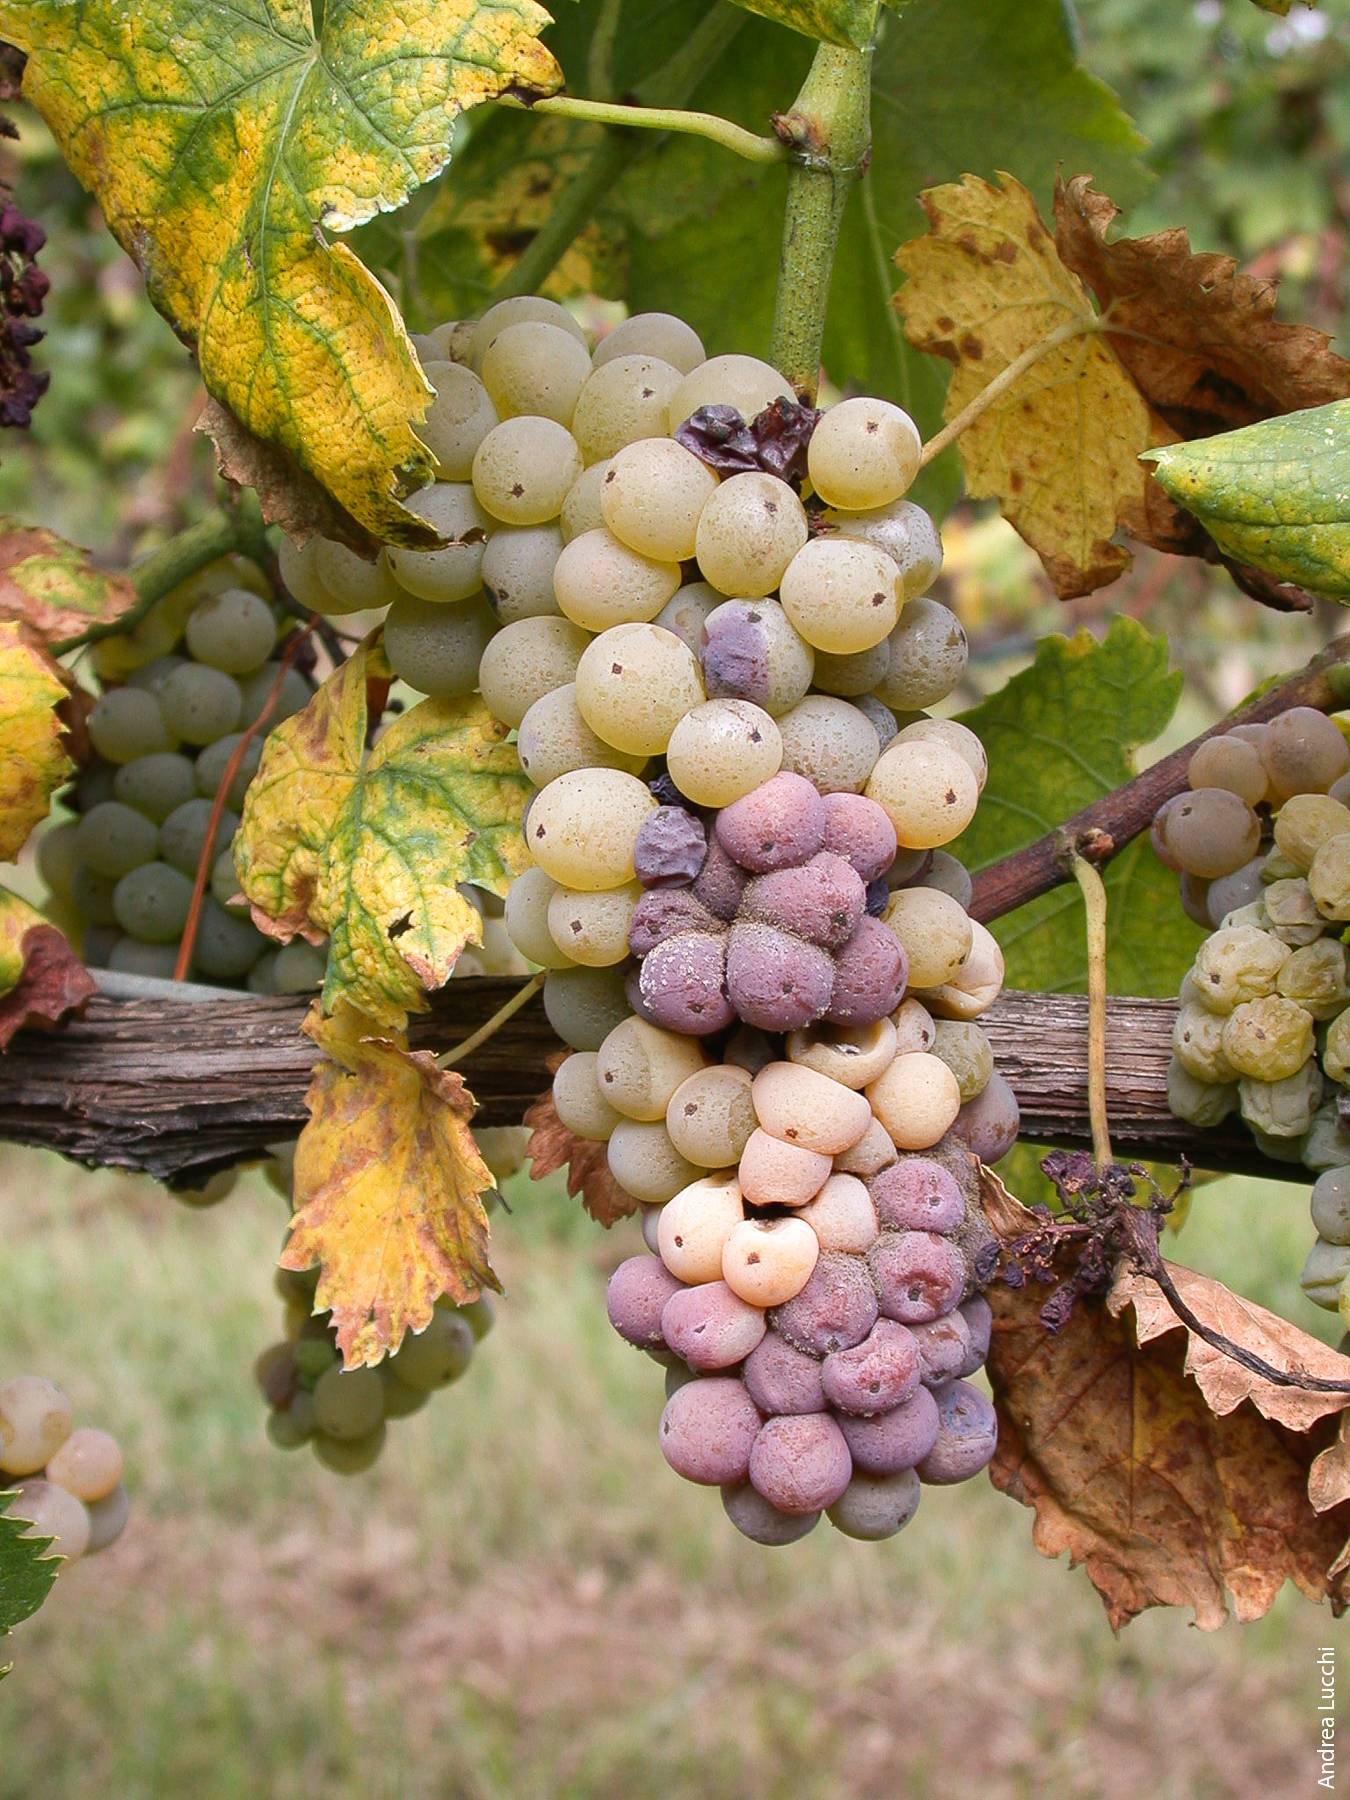 Feeding damage to grape berries by second- and third-generation larvae exposes them to fungal infections that can be economically damaging.